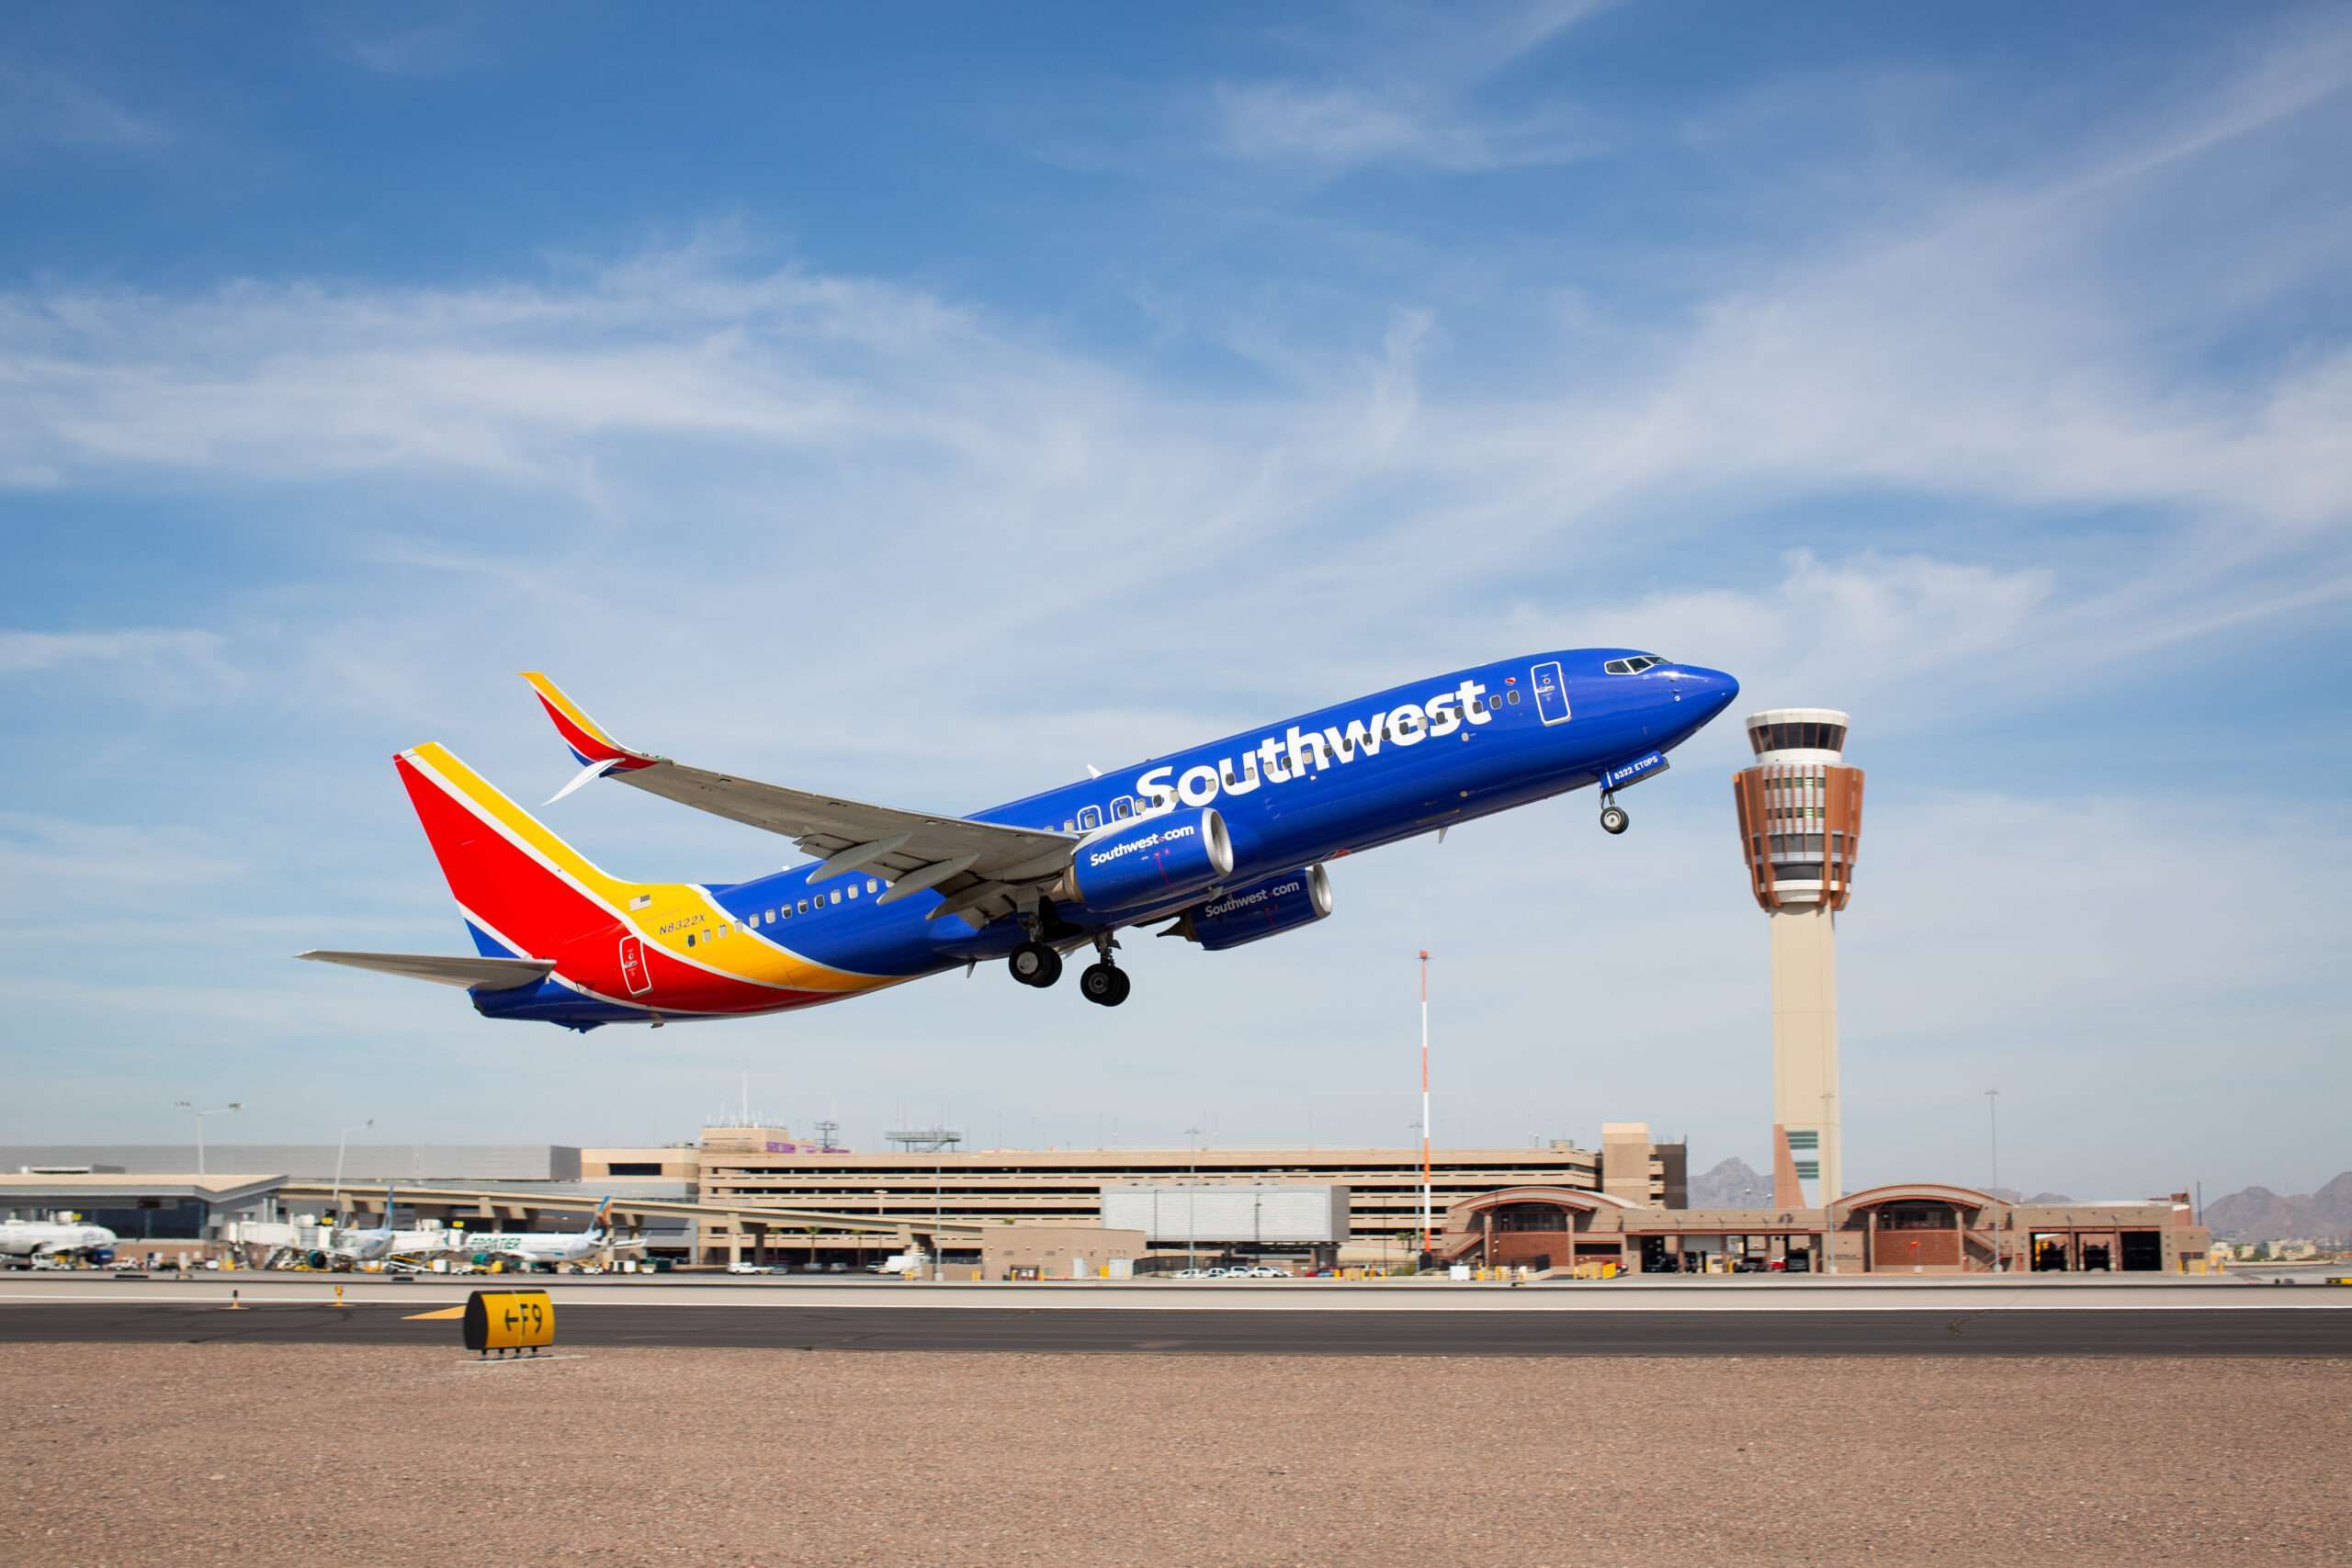 Southwest Flight From Oakland Suffers Engine Failure in Baltimore